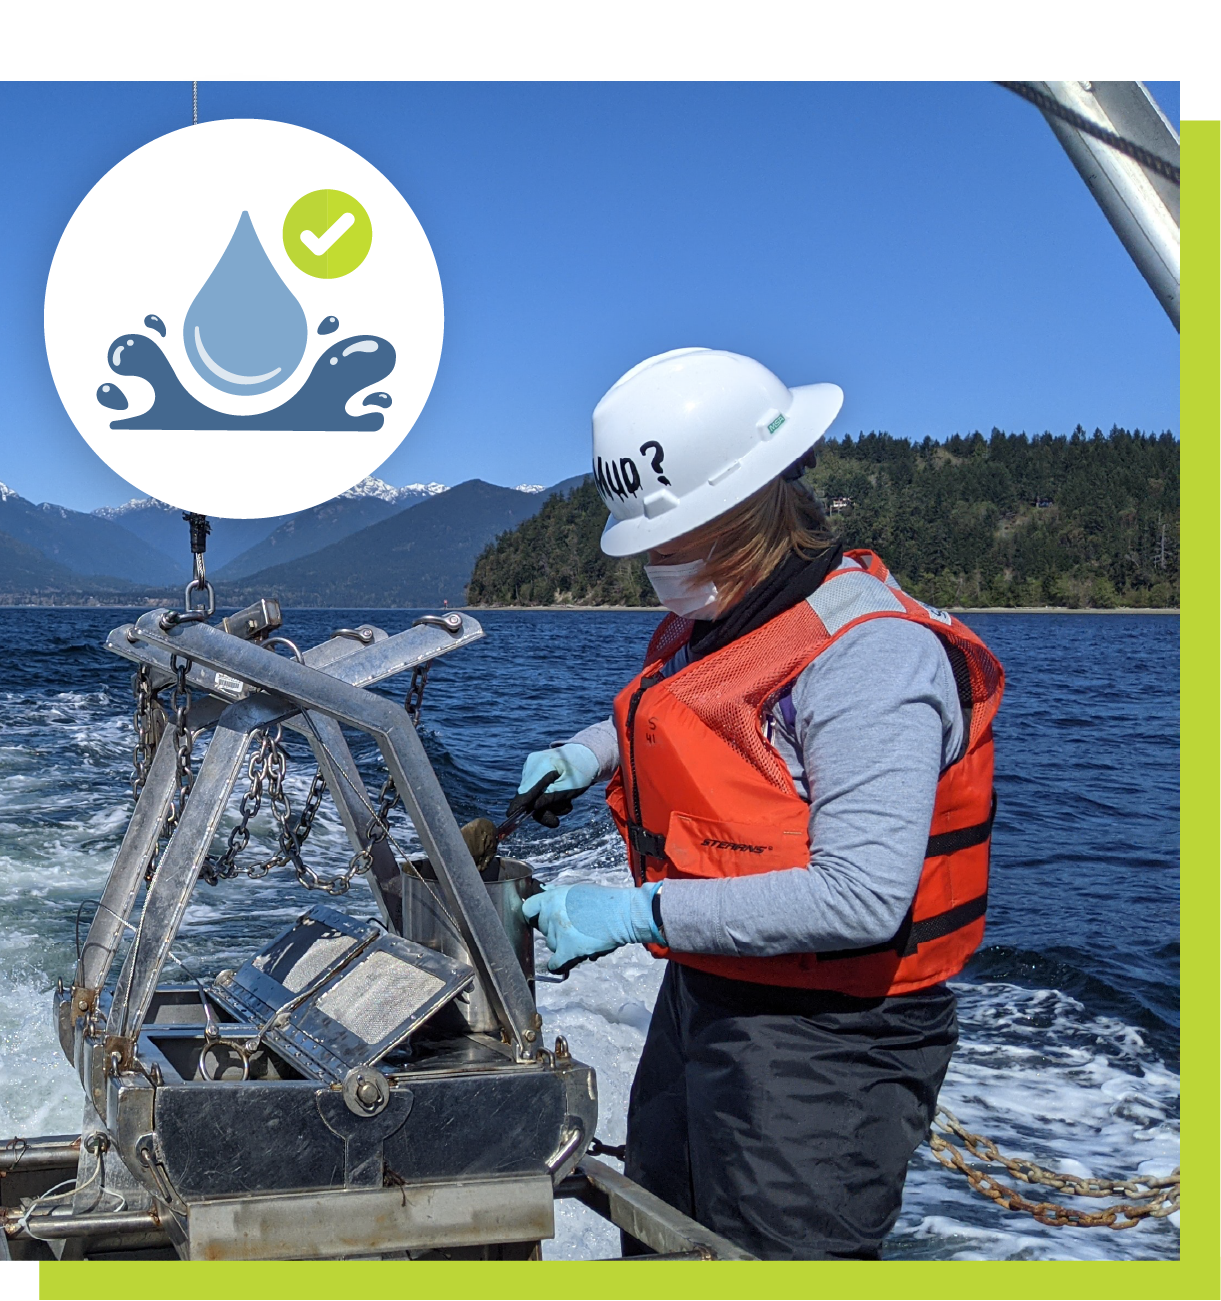 Ecology staff in a hardhat and life vest looks at sediment samples on a boat in Puget Sound, with the Olympic Mountains in the distance.